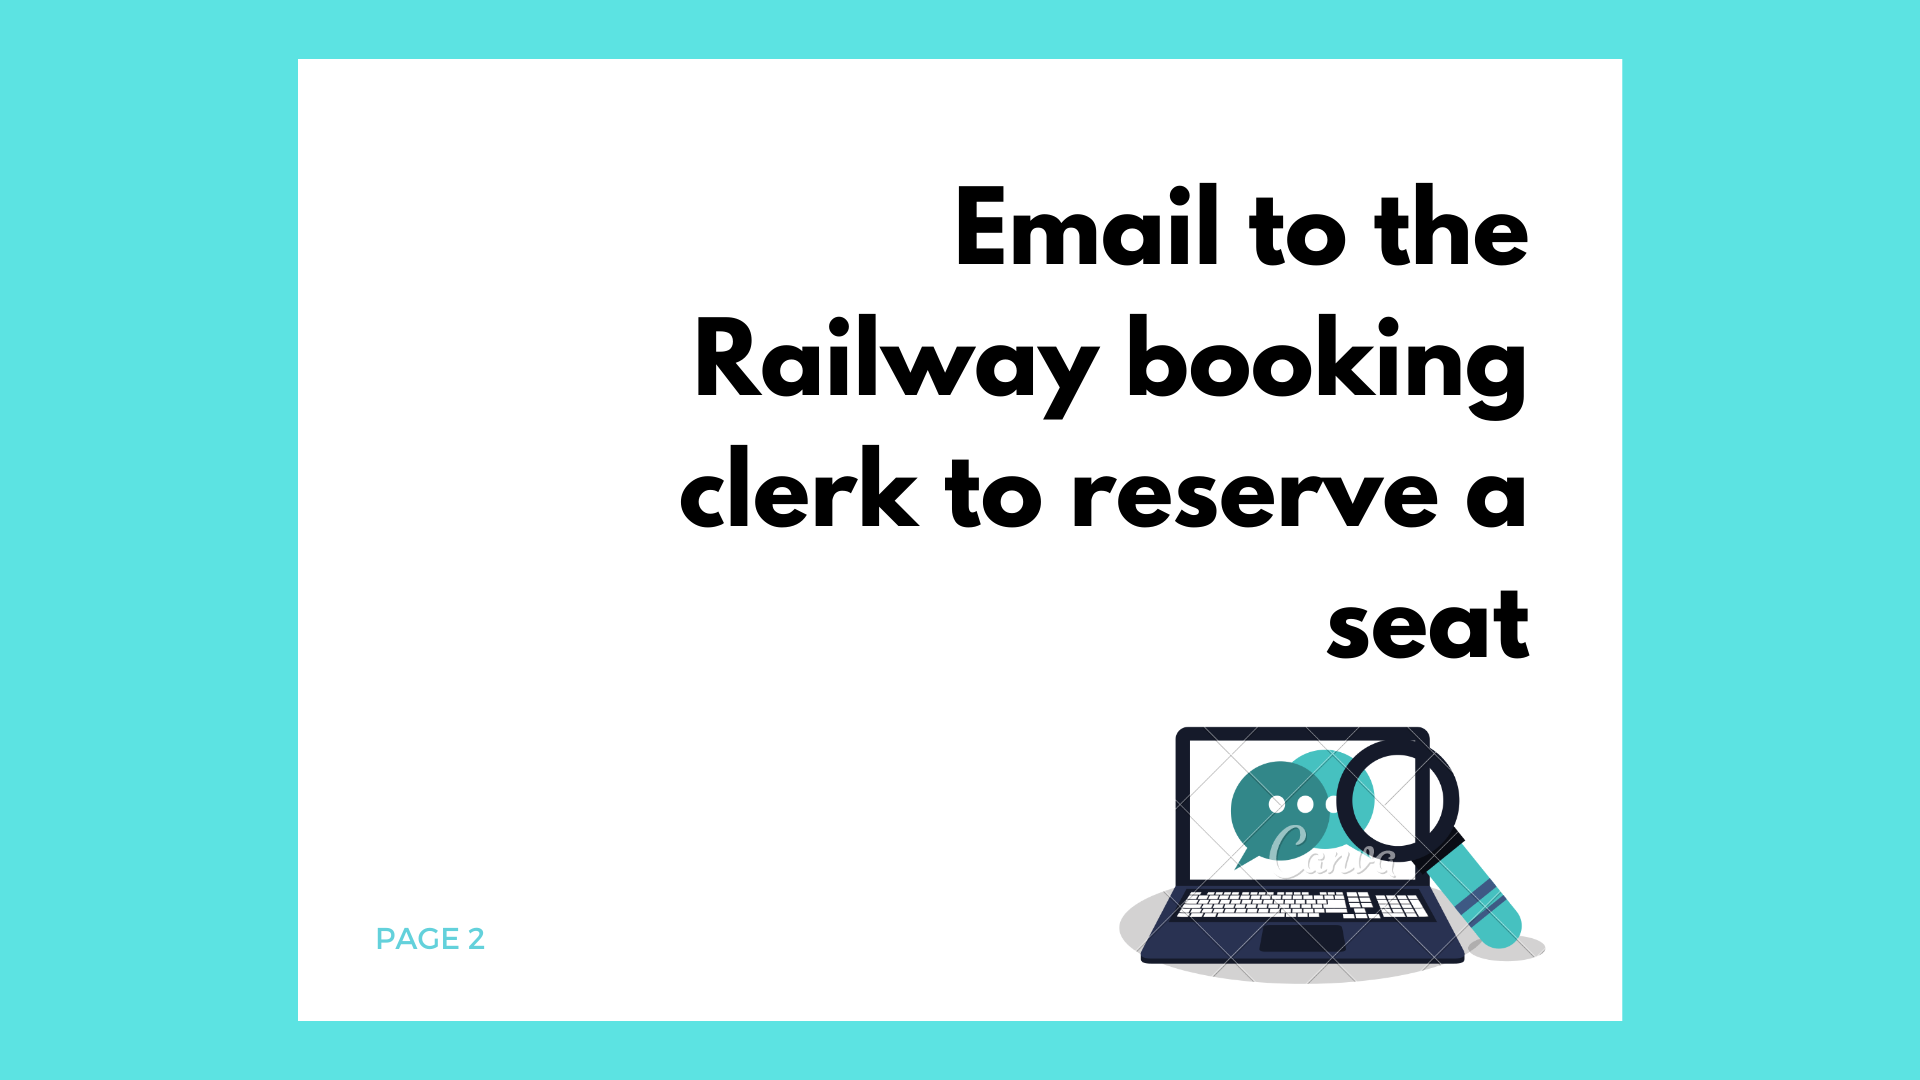 Email to the Railway booking clerk to reserve a seat